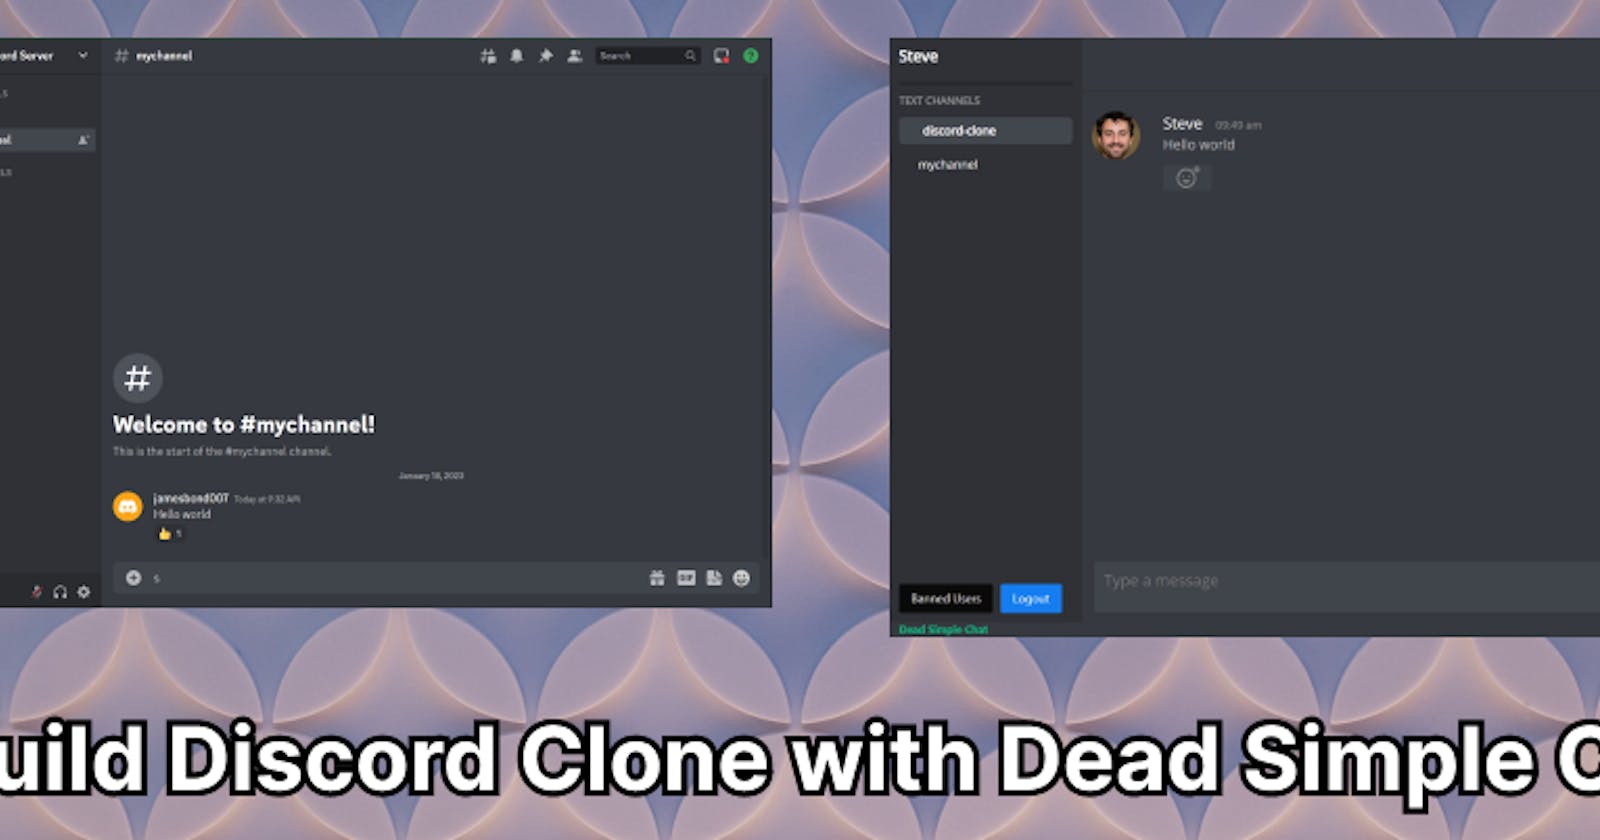 Build Discord Clone using Dead Simple Chat